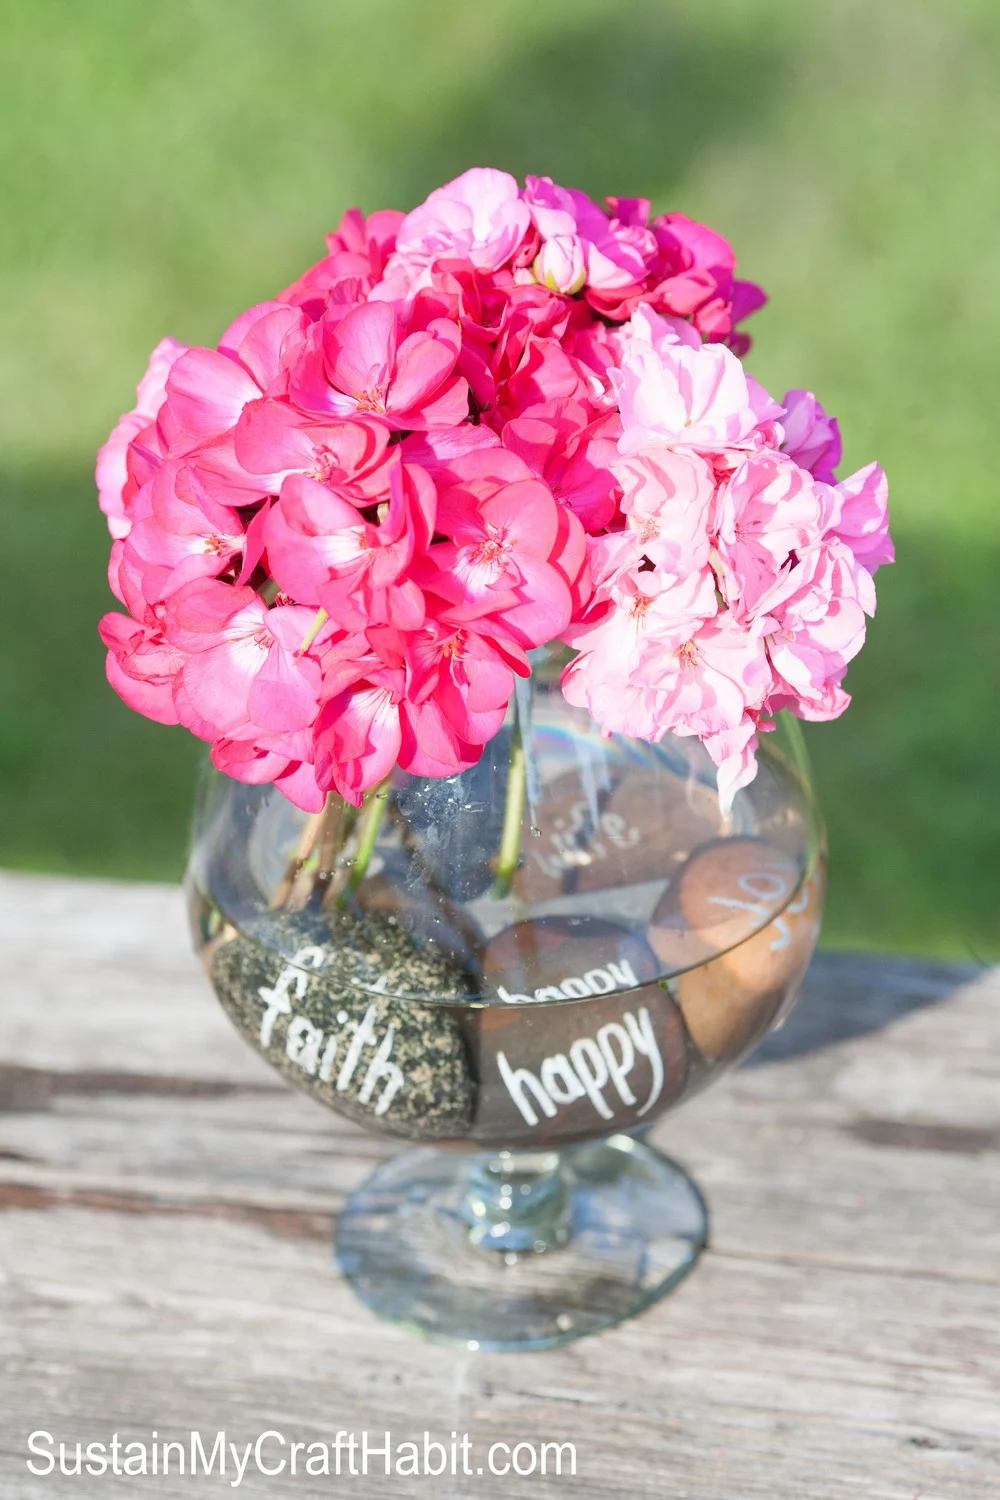 Stunning centerpieces don't have to break the bank. Try this DIY stone inscribed fresh flower centerpiece for your next special event.